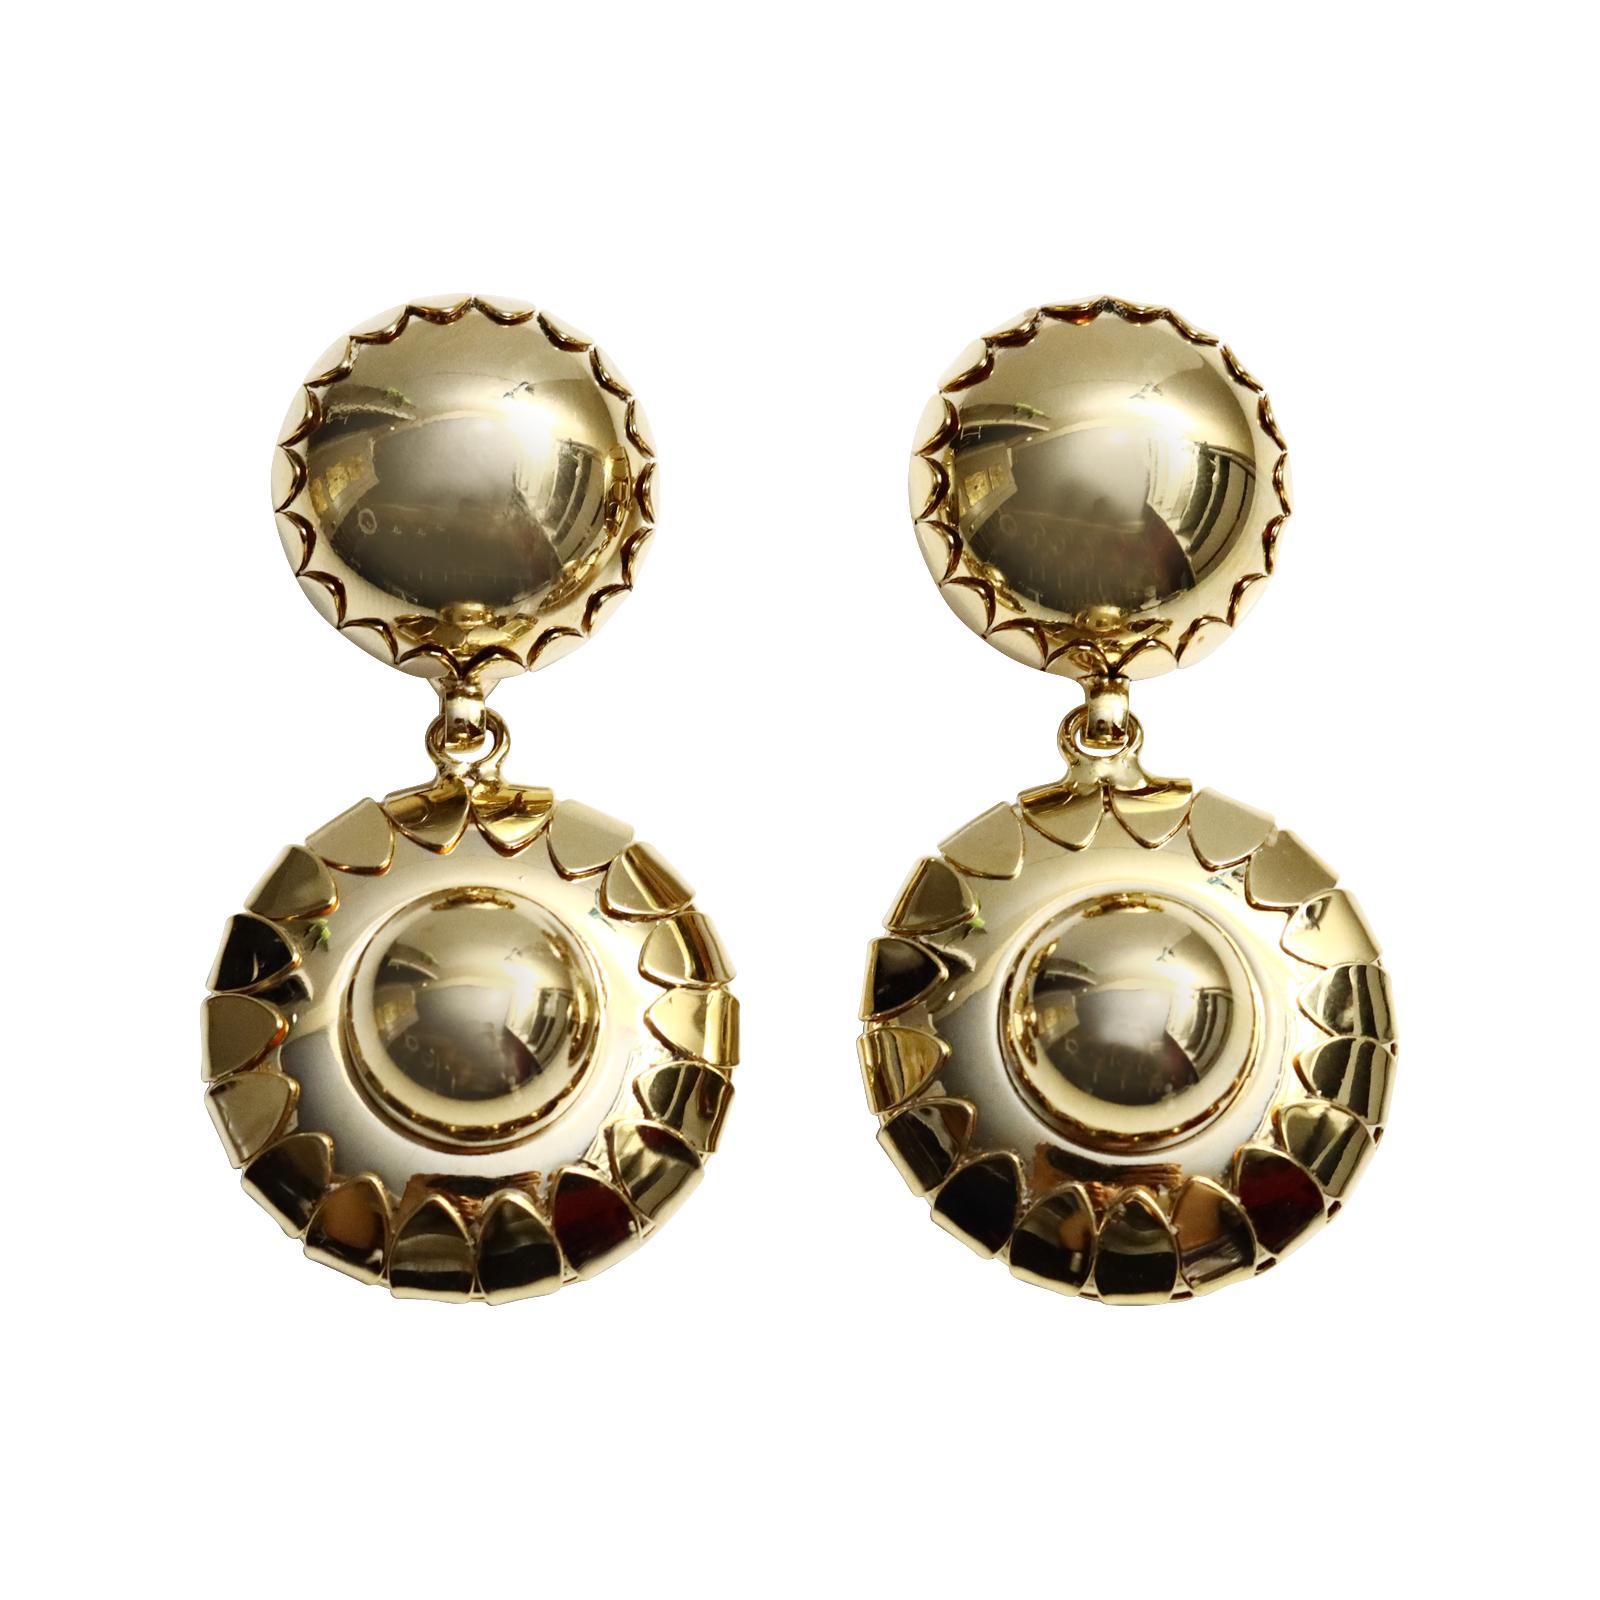 Vintage Gold Tone Dangling Circle Like Earrings Circa 2000s. These earrings remind me of the brand new Celine bracelet cuff that was just released with the circle like thing on it. Very Chic for summer or winter and stand out. Clip on.